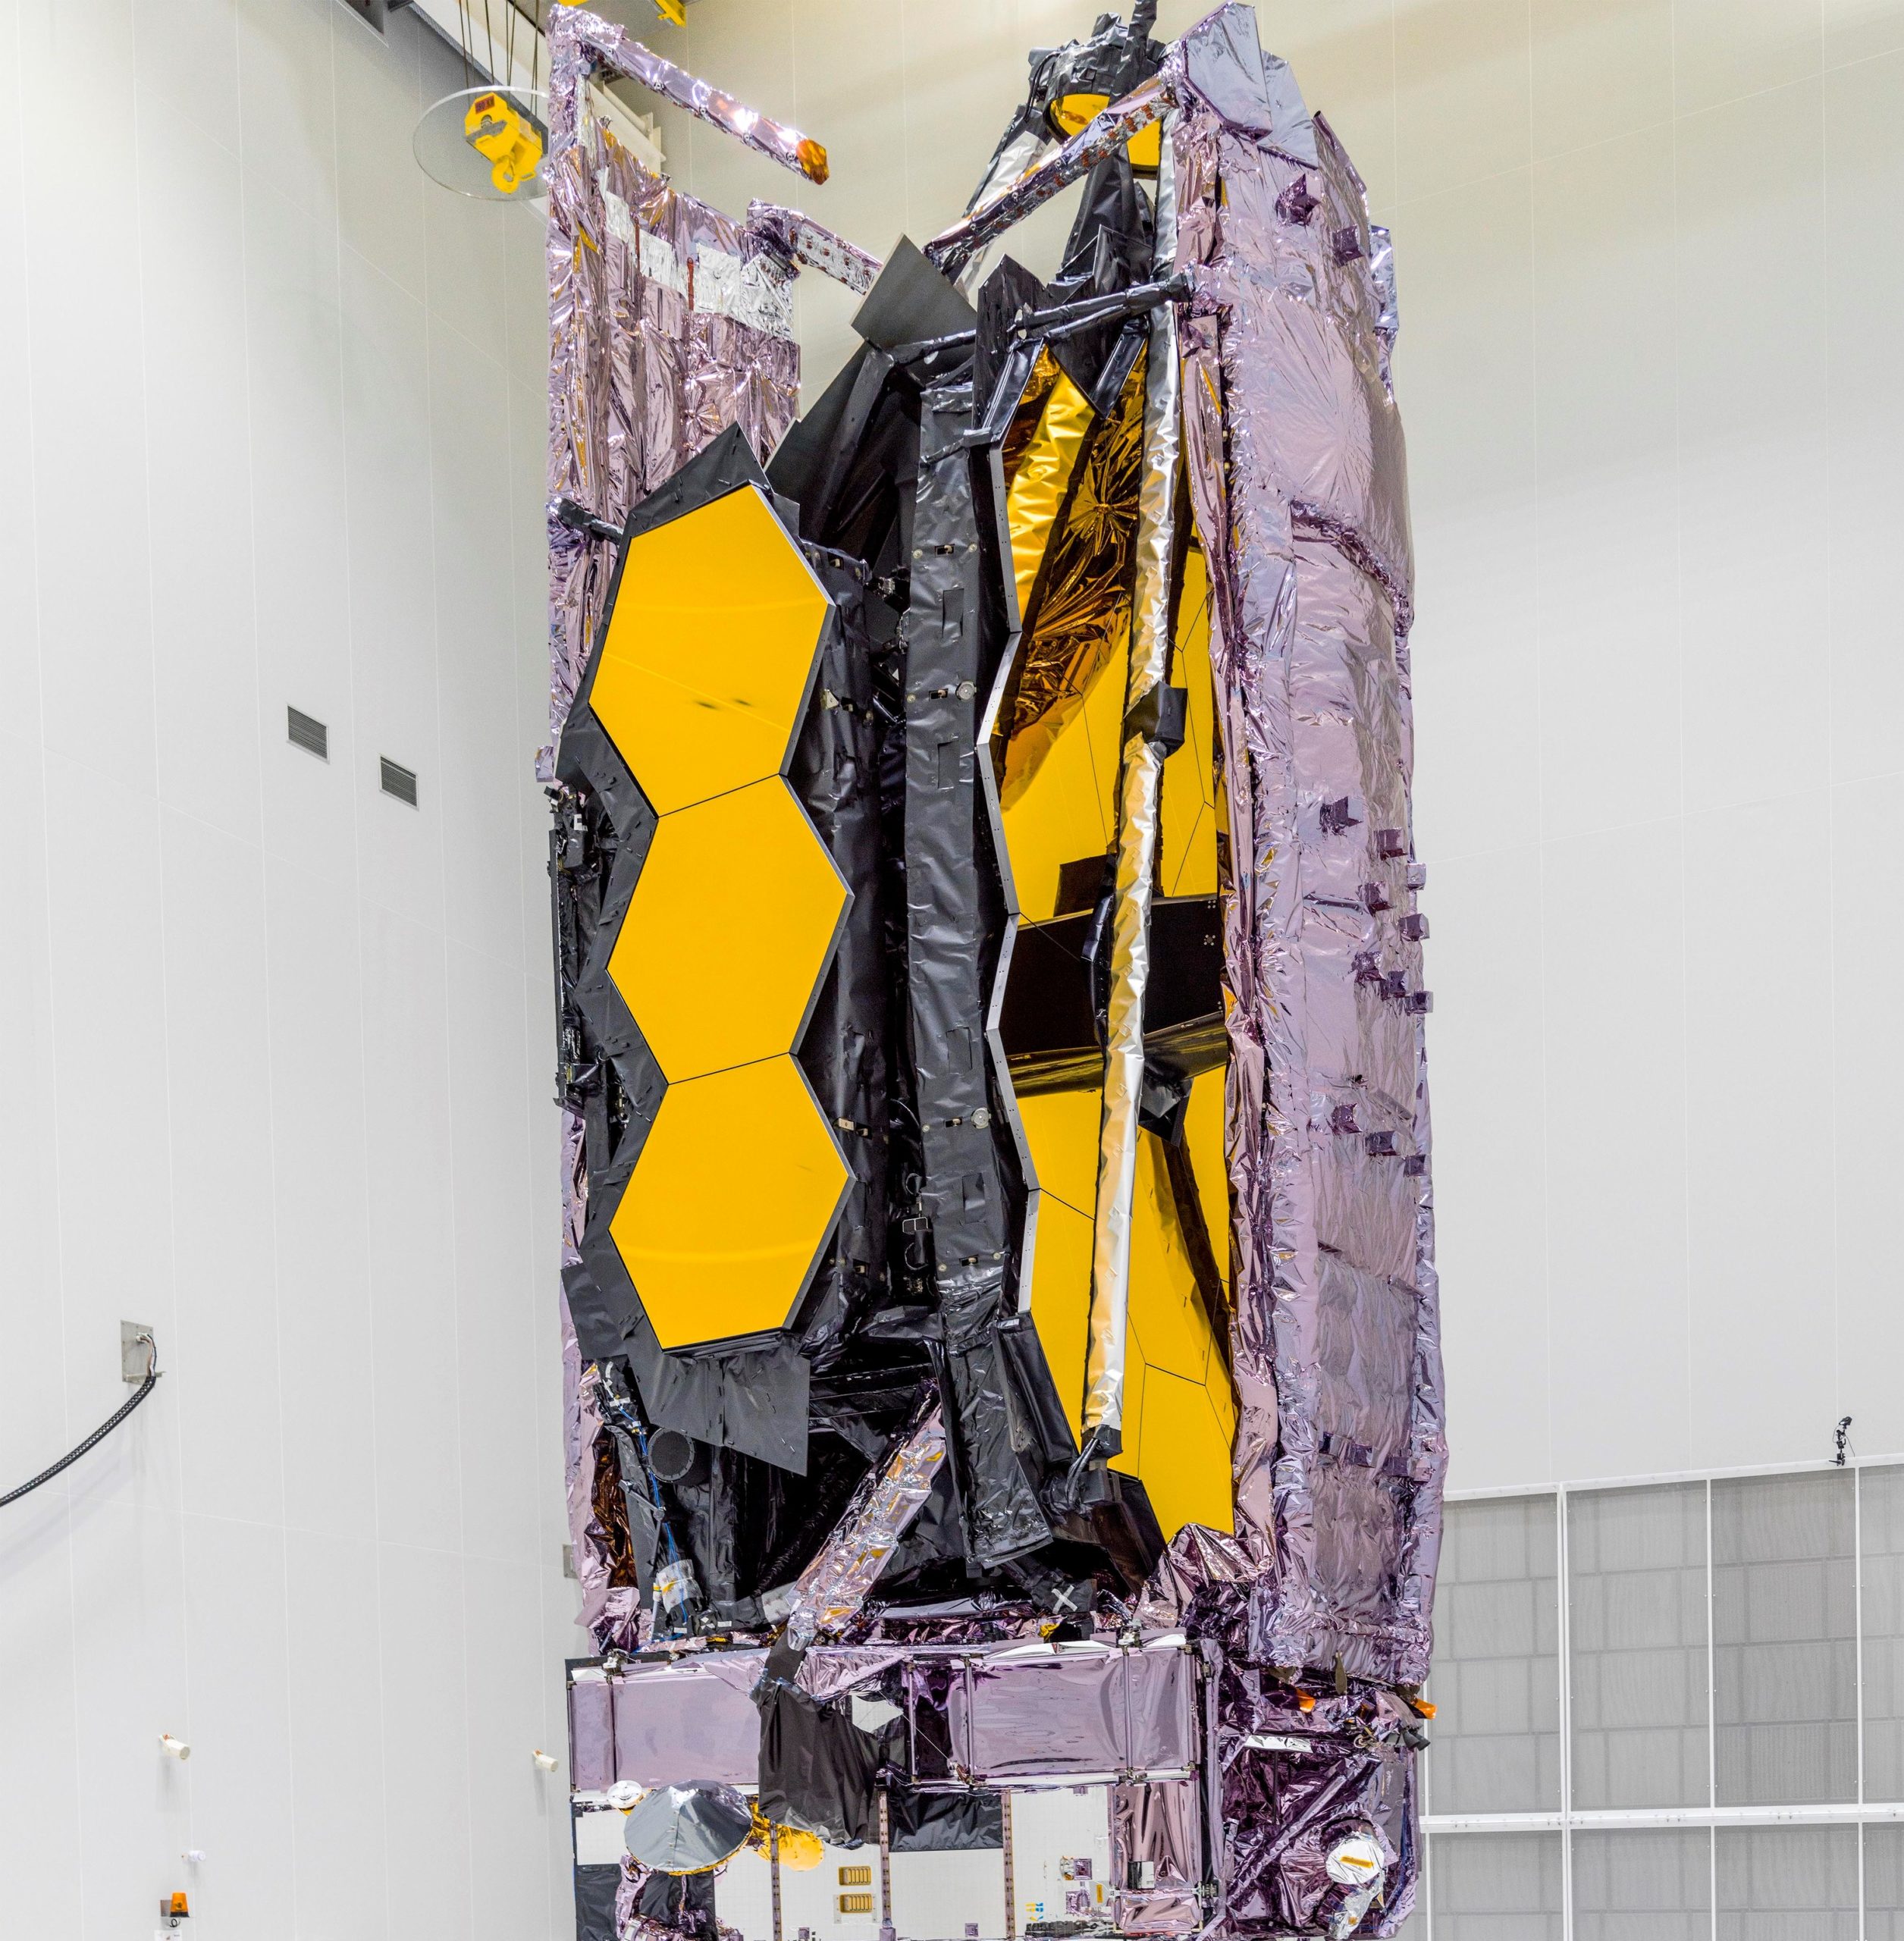 NASA Webb Telescope Fueled for late December Launch